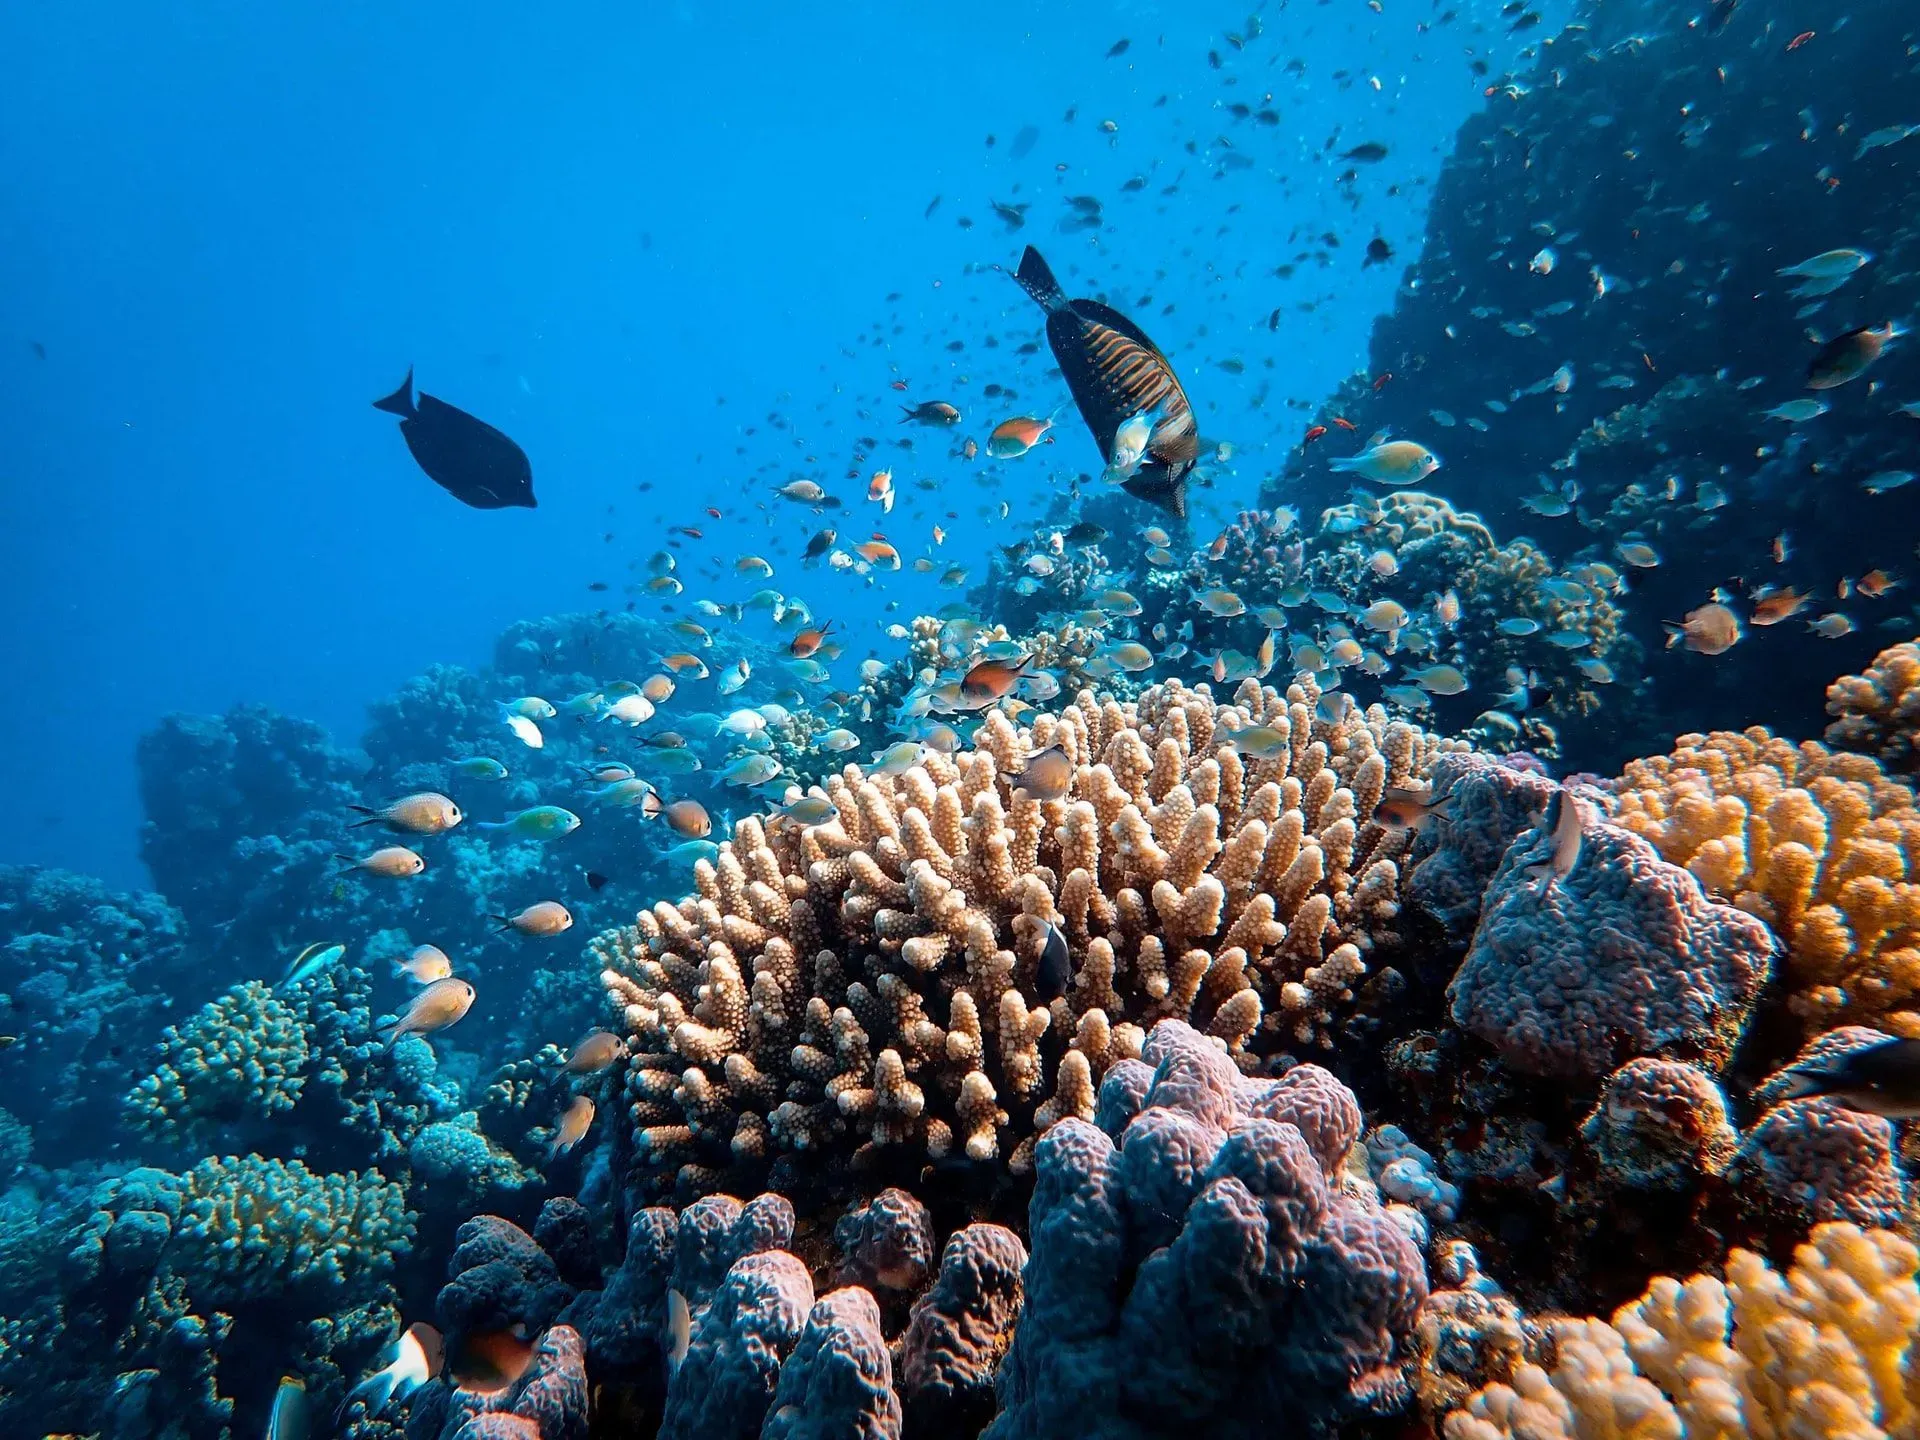 Coral reefs are home to around 4,000 different fish species.